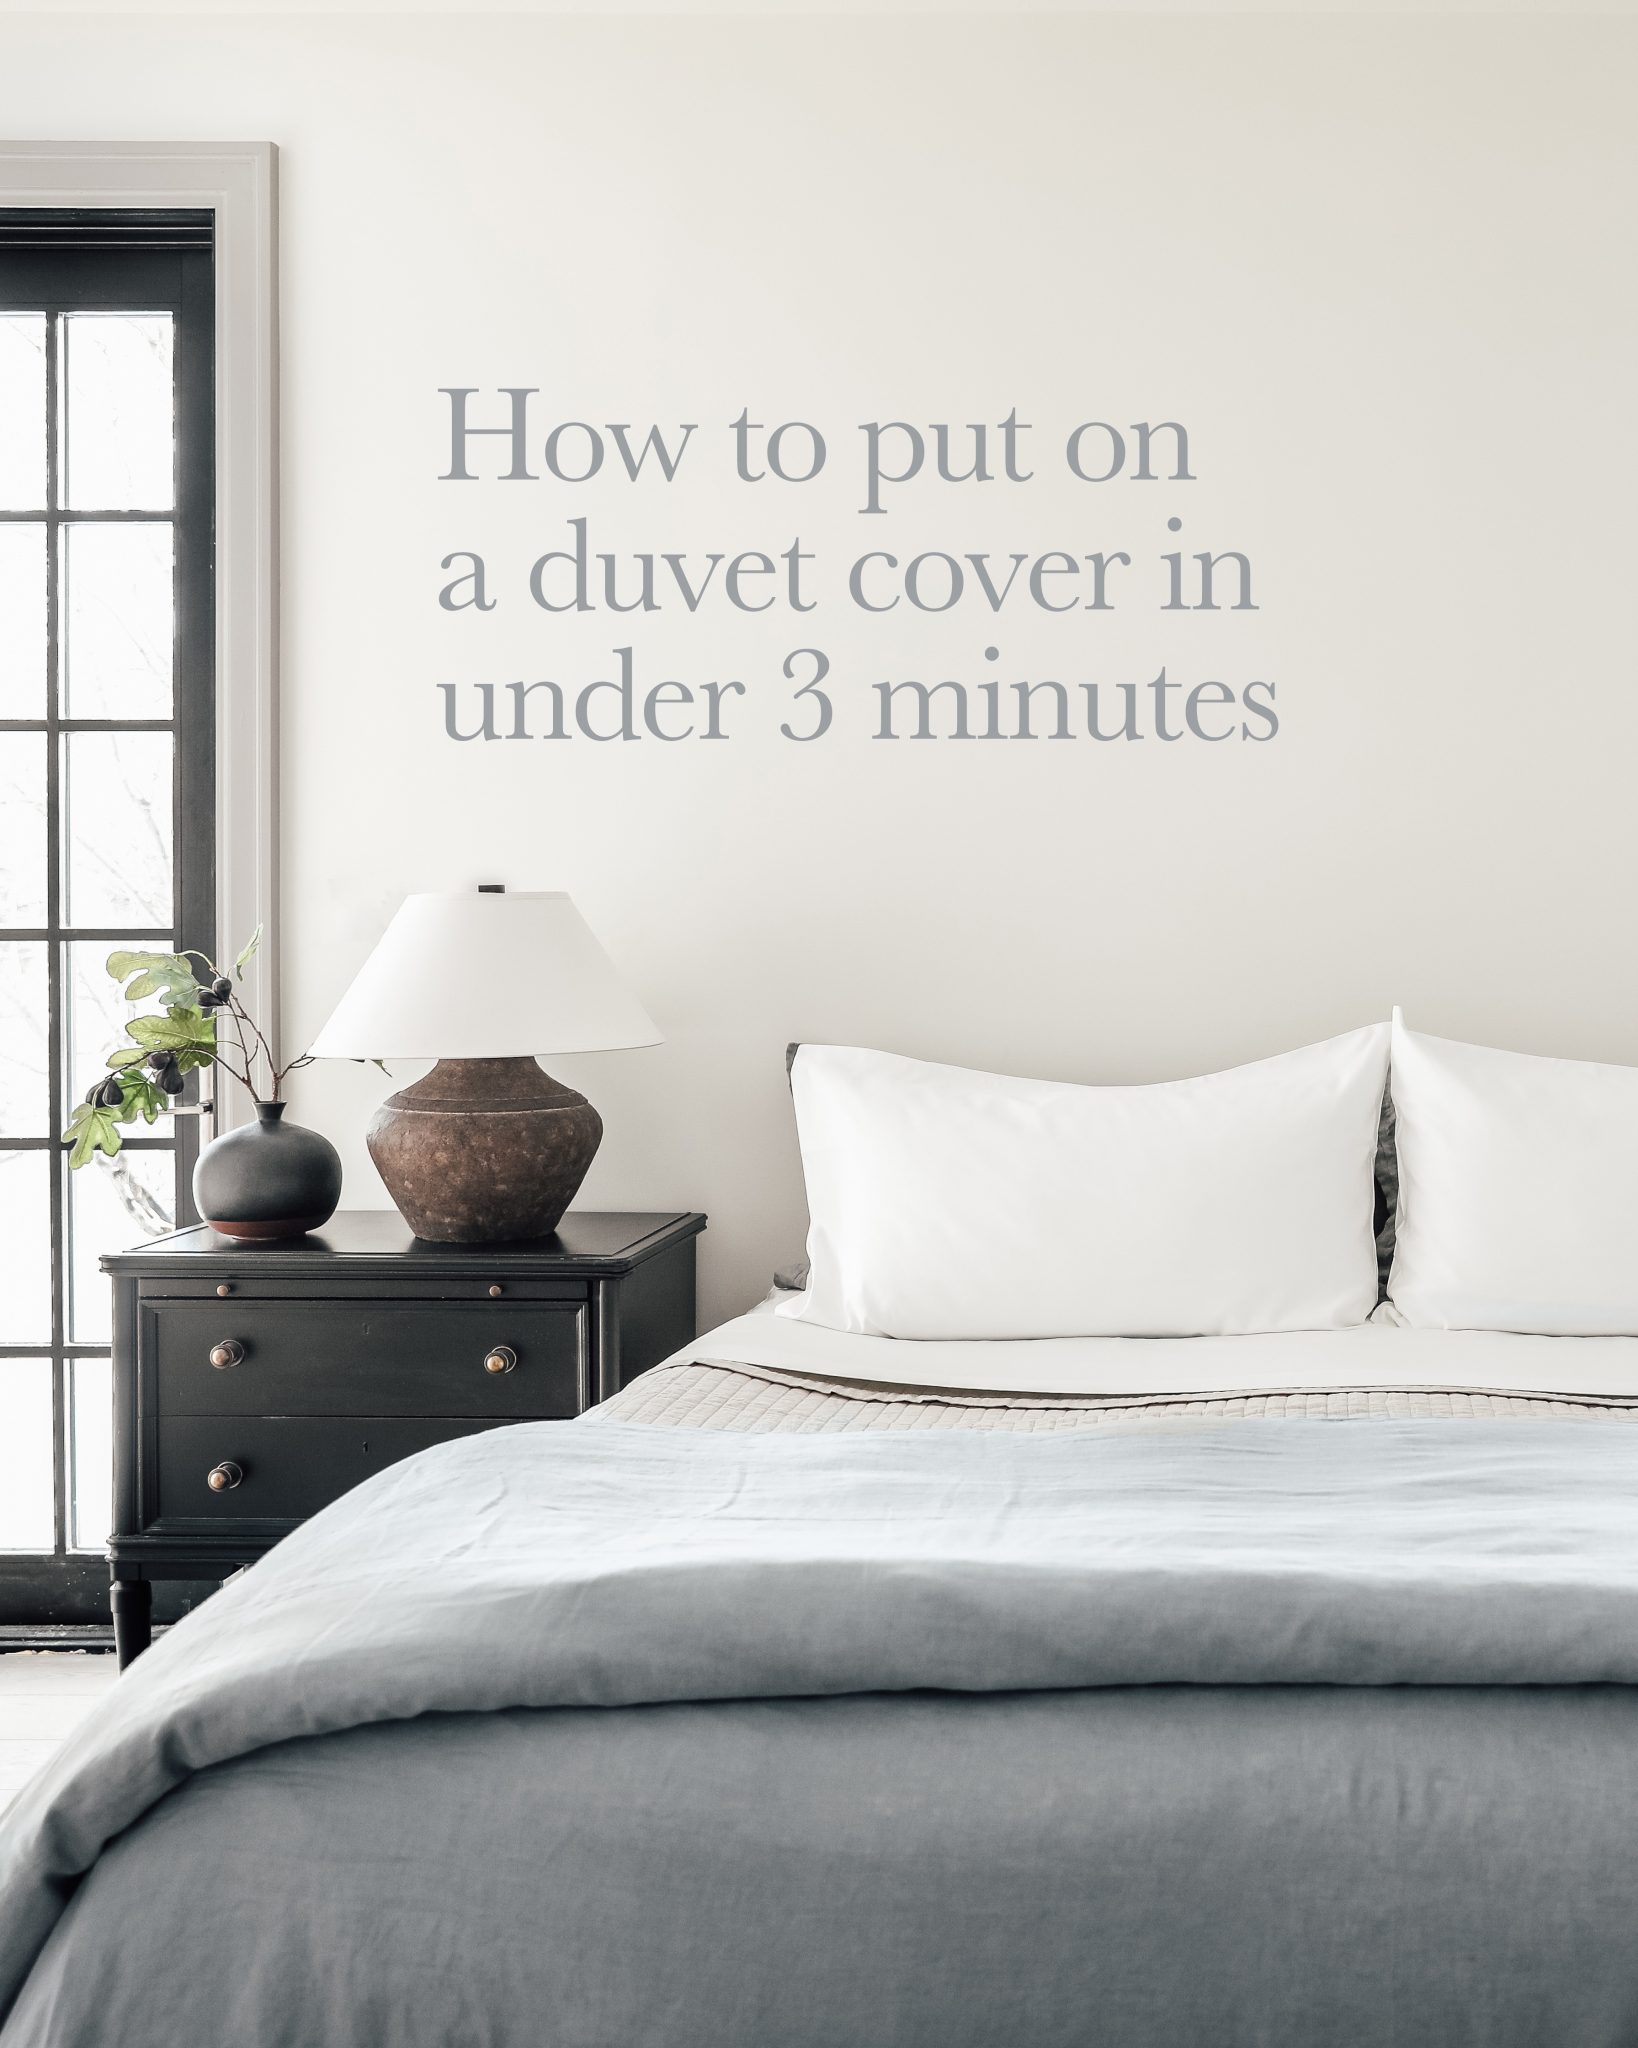 How To Put On A Duvet Cover In Under 3, How To Put On Duvet Cover Clips